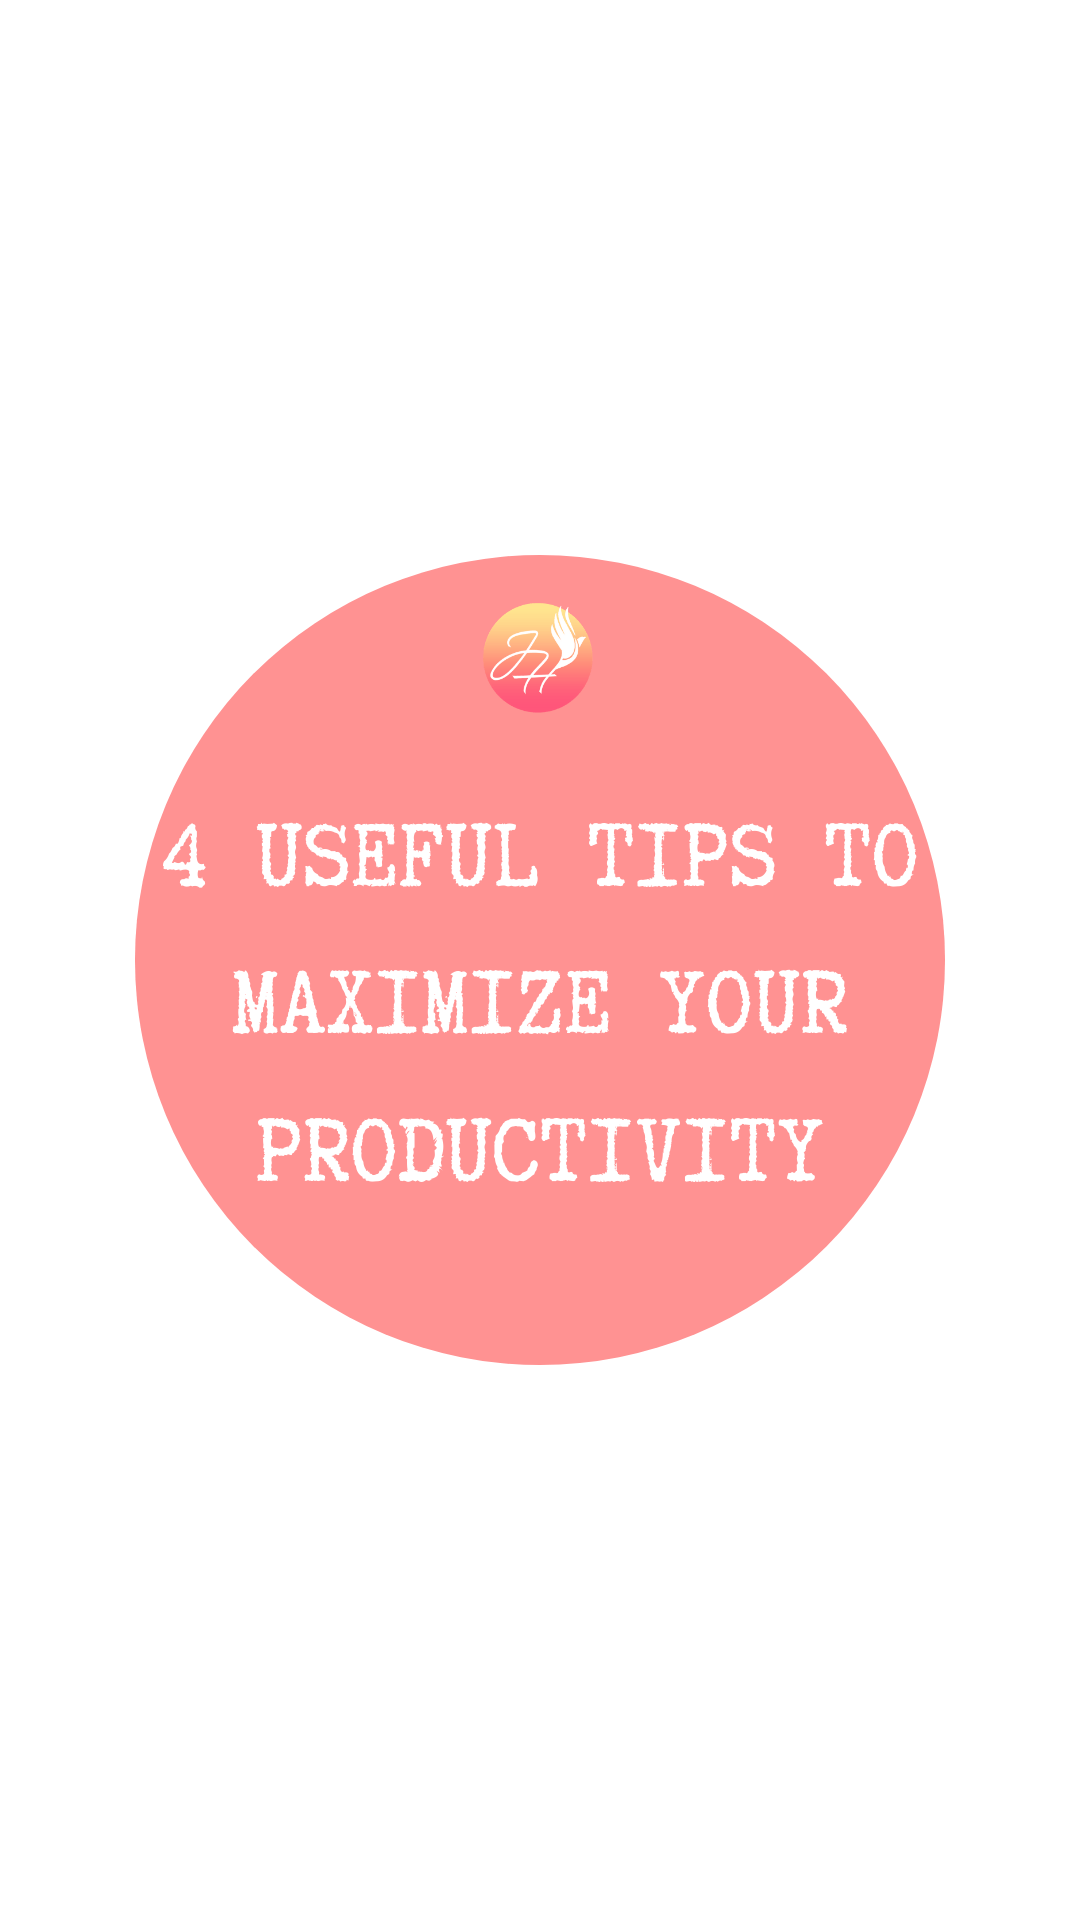 4 USEFUL TIPS TO MAXIMIZE YOUR PRODUCTIVITY